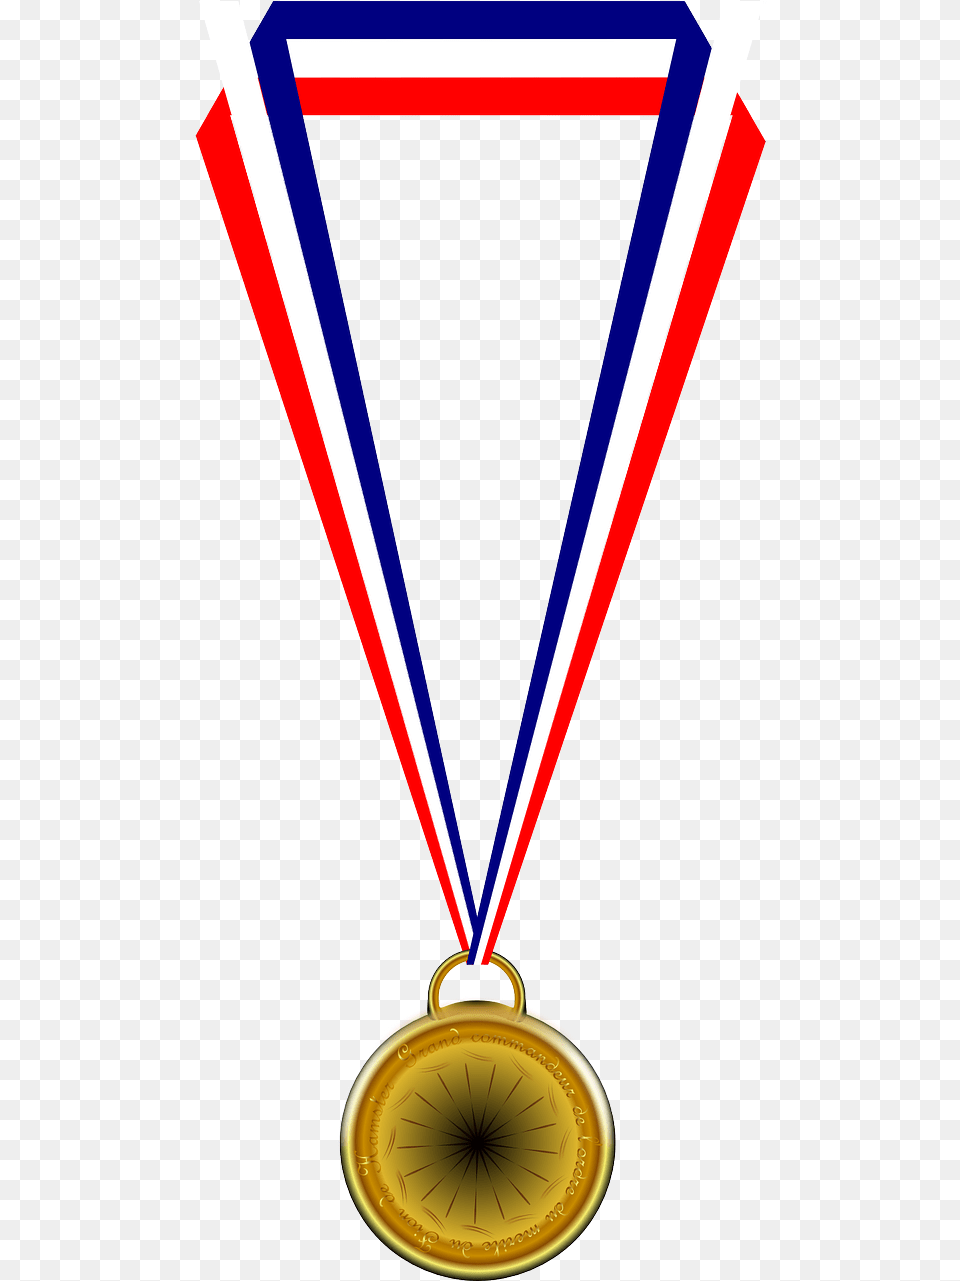 Medal Medallion Winner Ribbons And Medal, Gold, Gold Medal, Trophy, Accessories Free Transparent Png